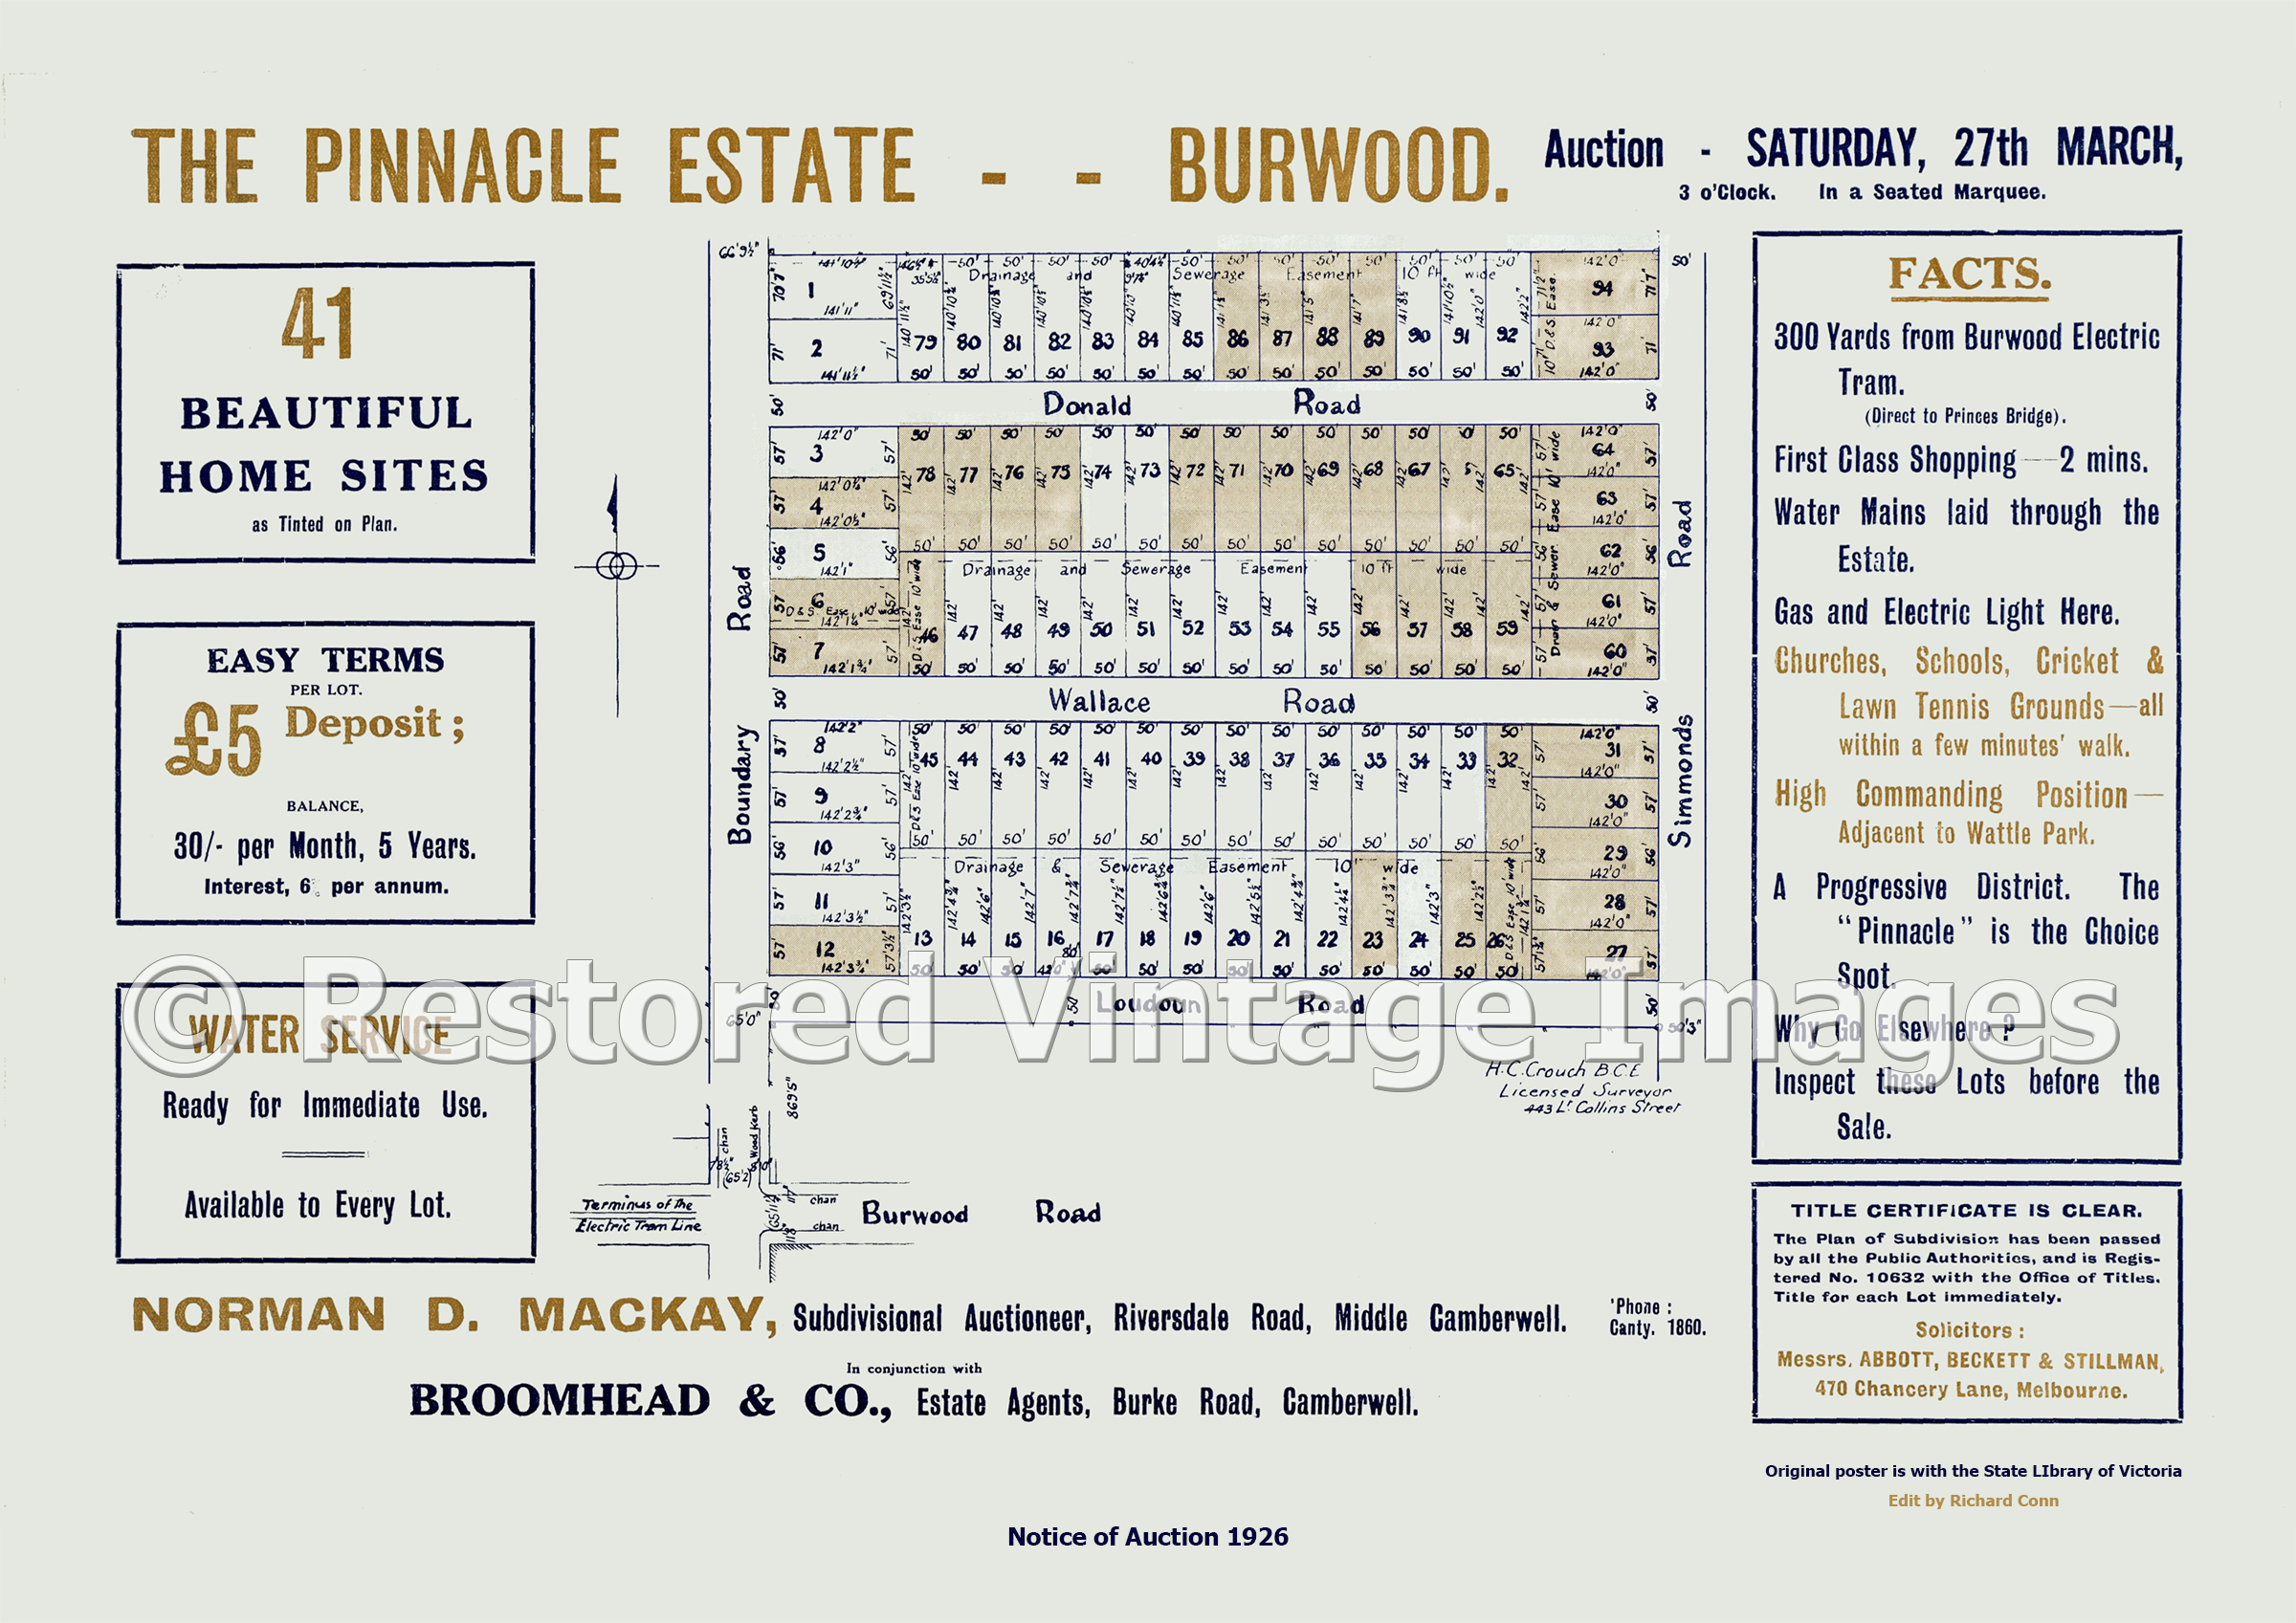 The Pinnacle Estate 27th March 1926 – Burwood